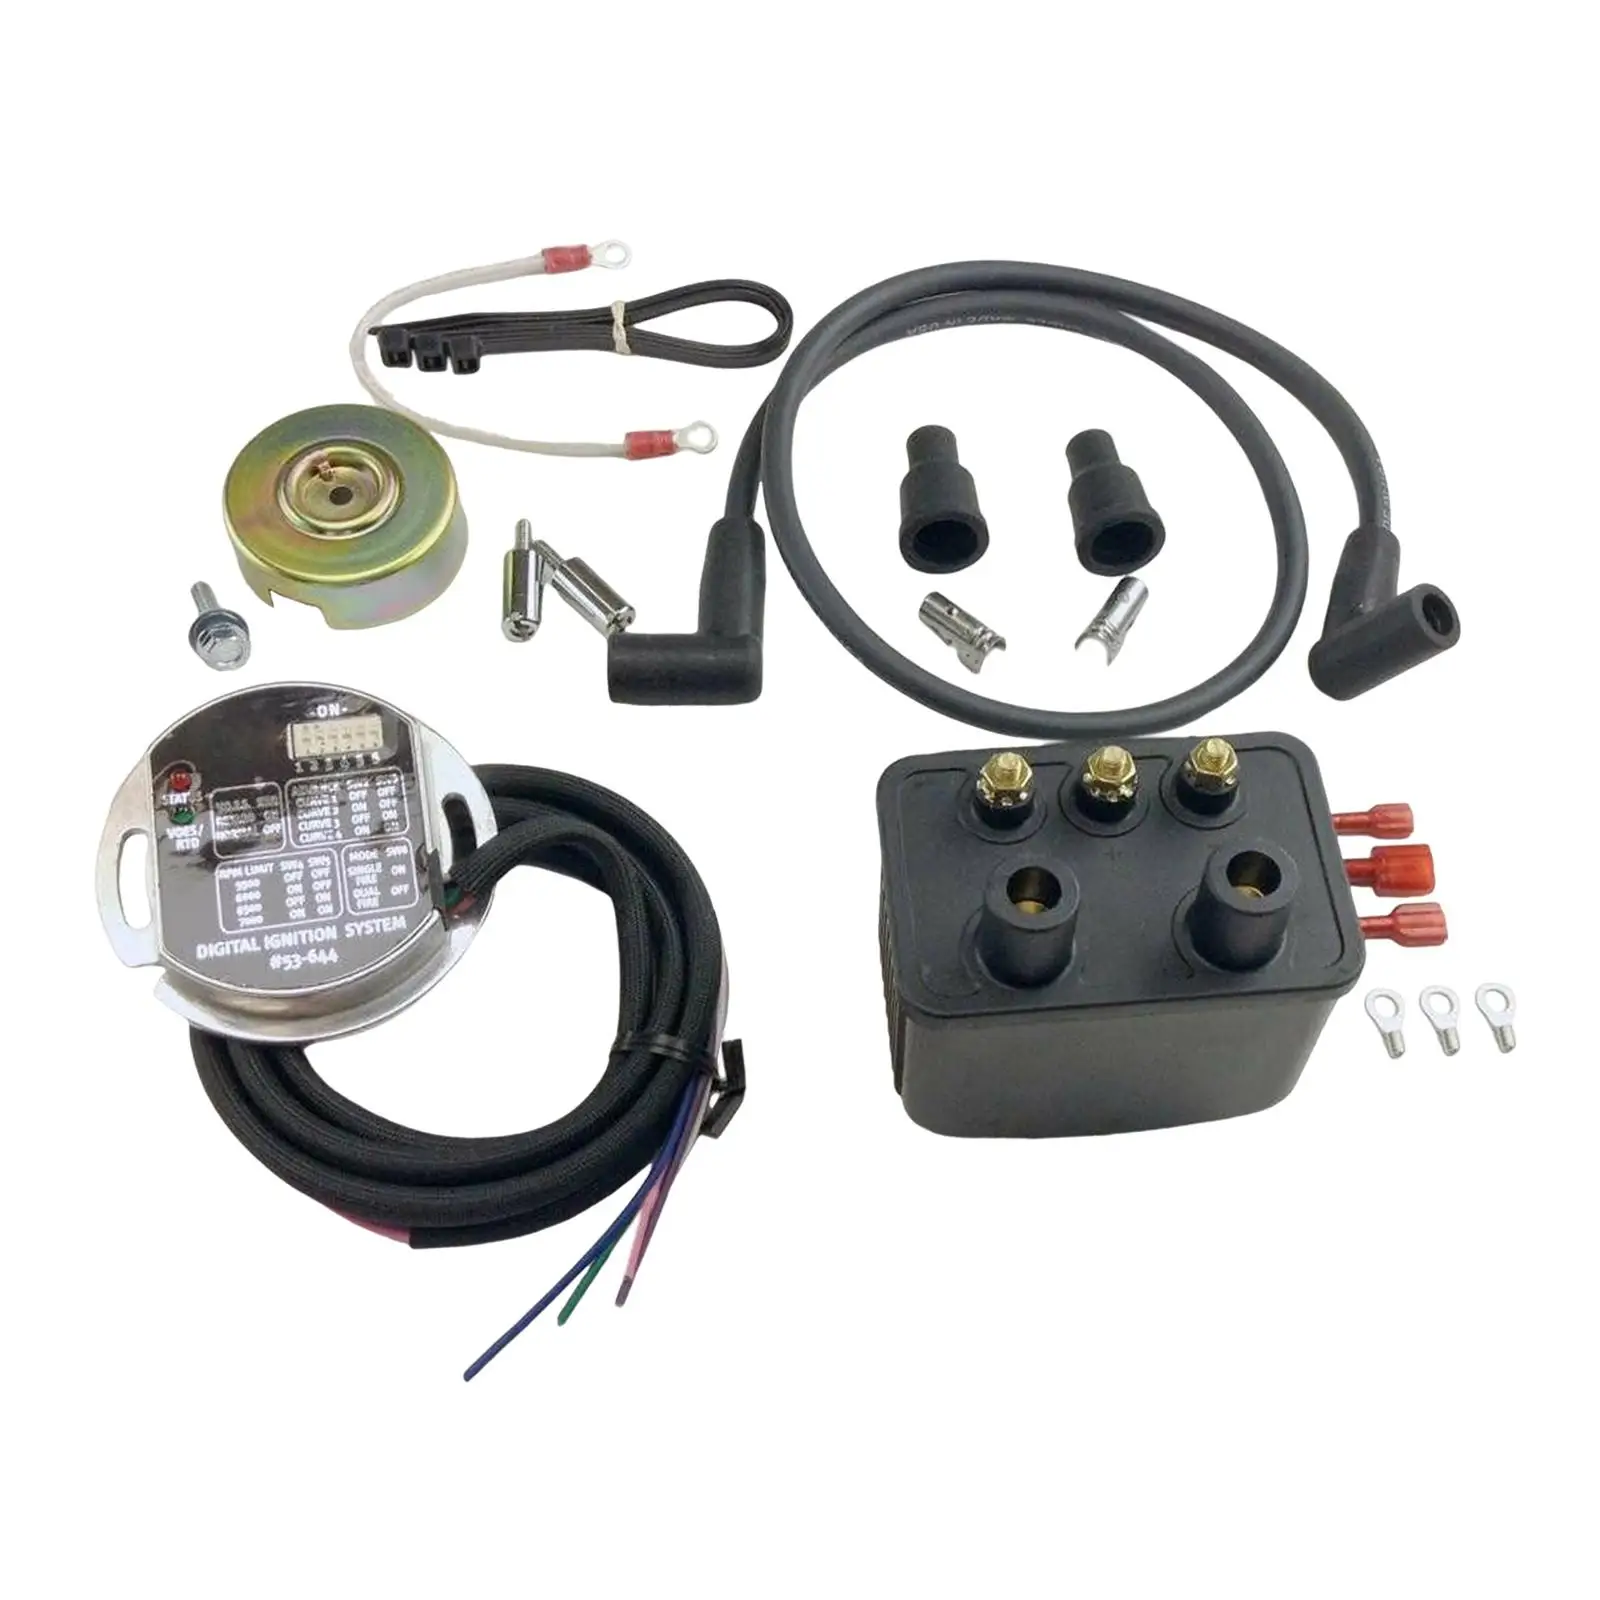 Single Fire Programmable Ignition Kit Accessory Replaces for Harley Shovelhead Sportst Repair Part Easy to Install Quality